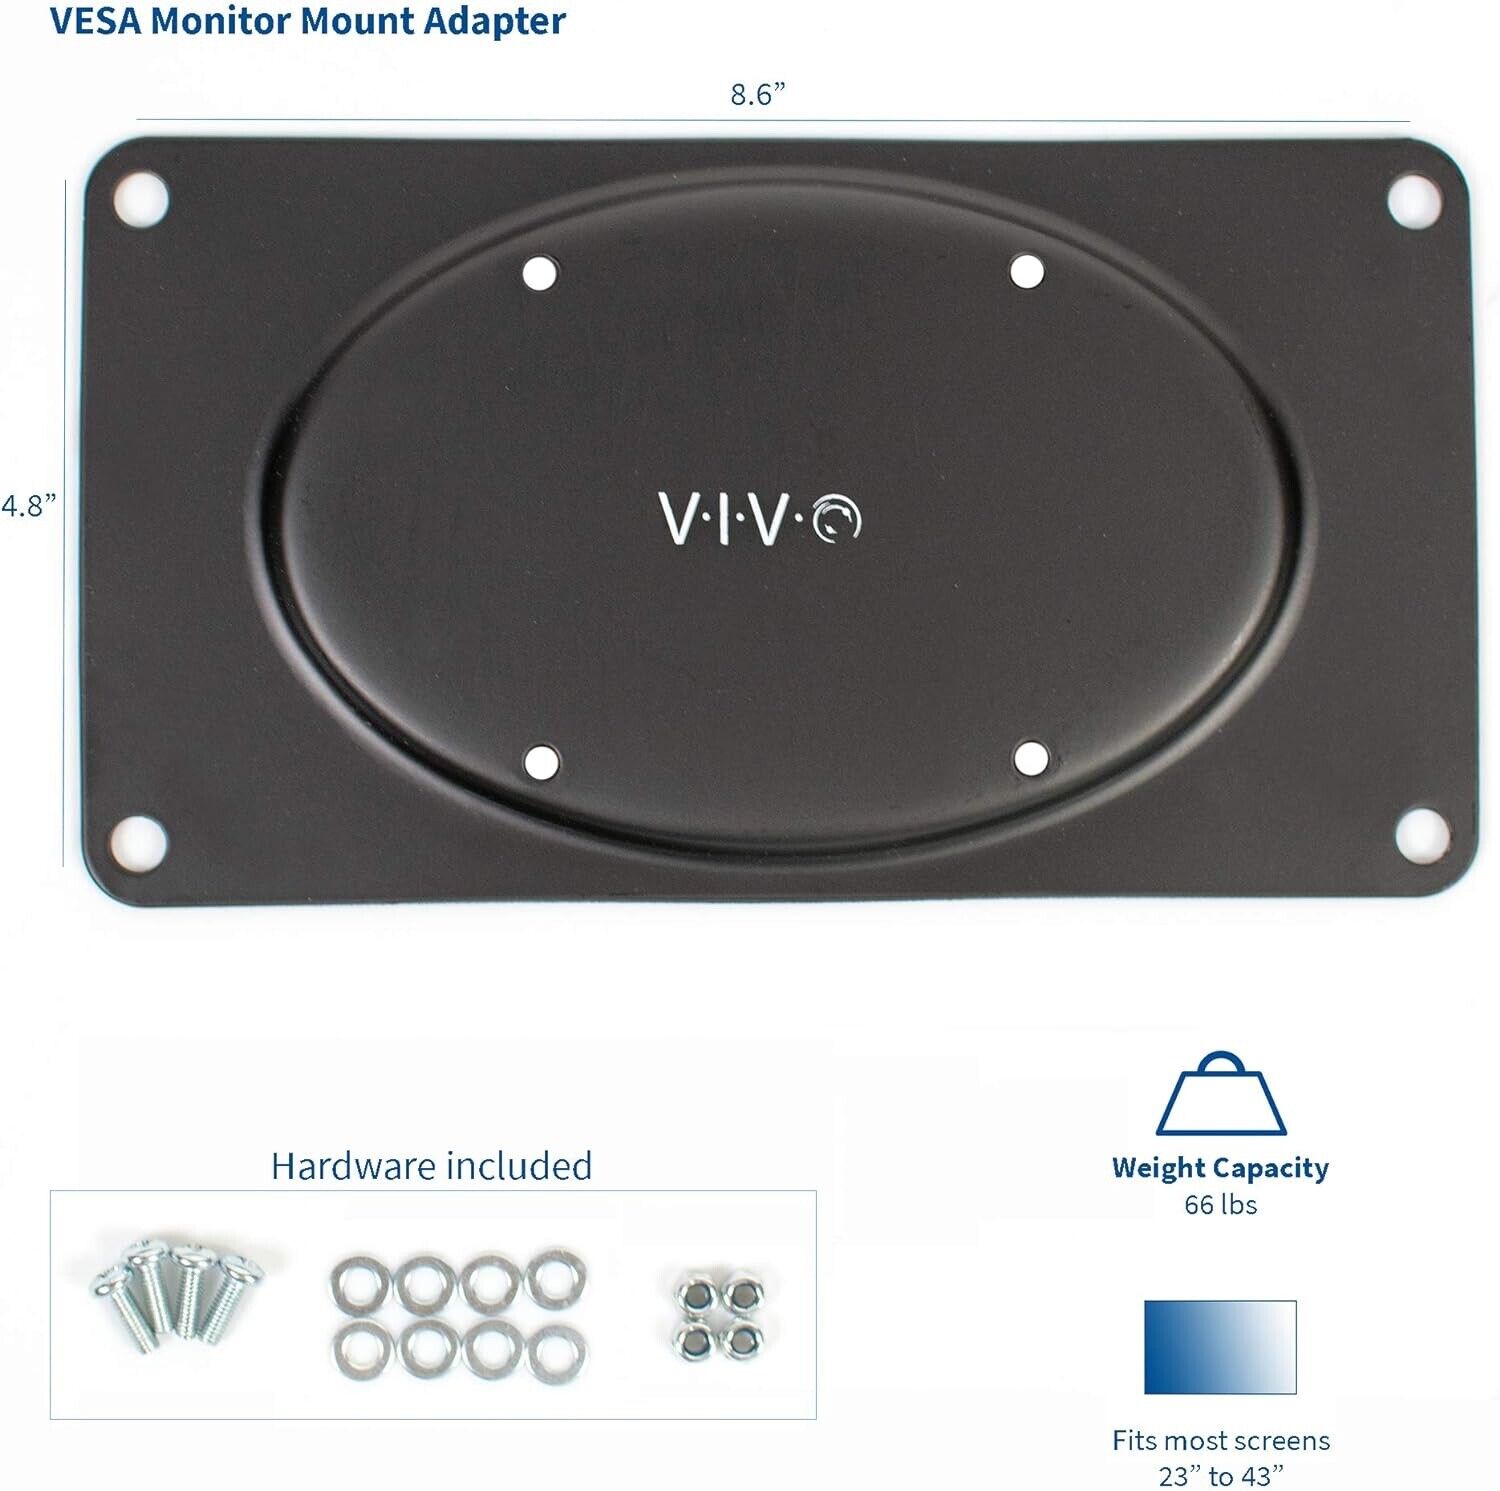 Steel VESA Monitor Mount Adapter Plate for Monitor Screens up to 43